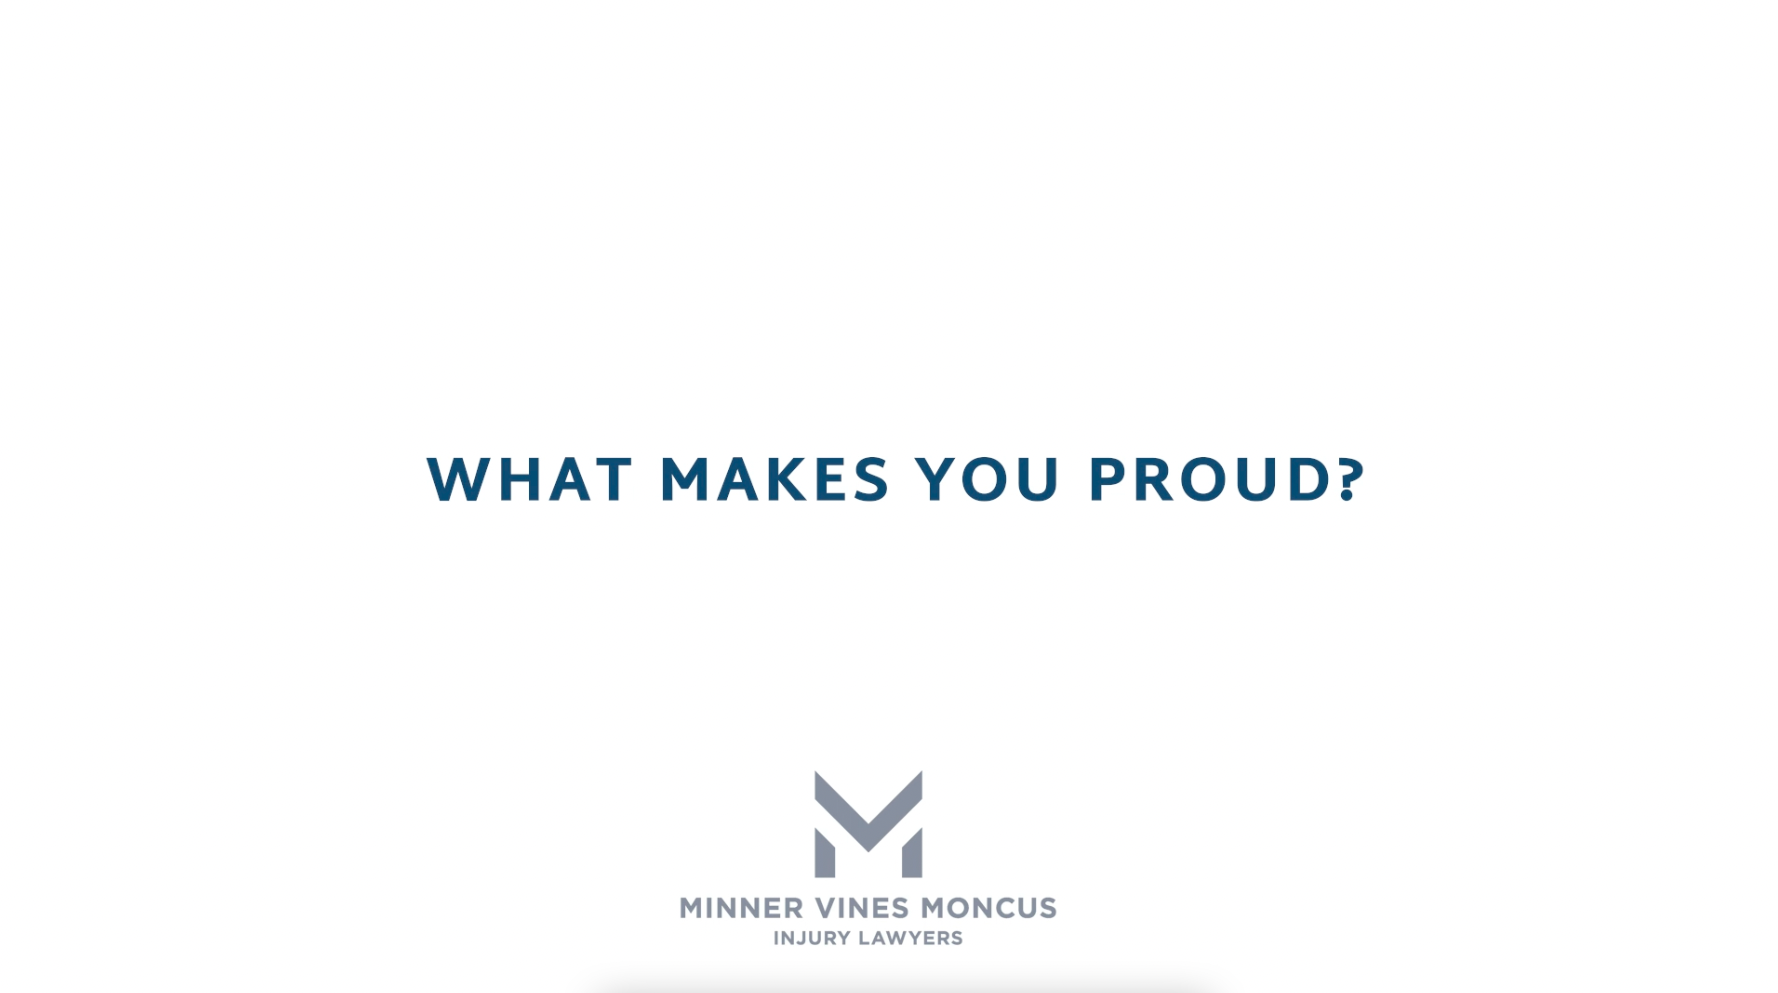 What makes you proud?